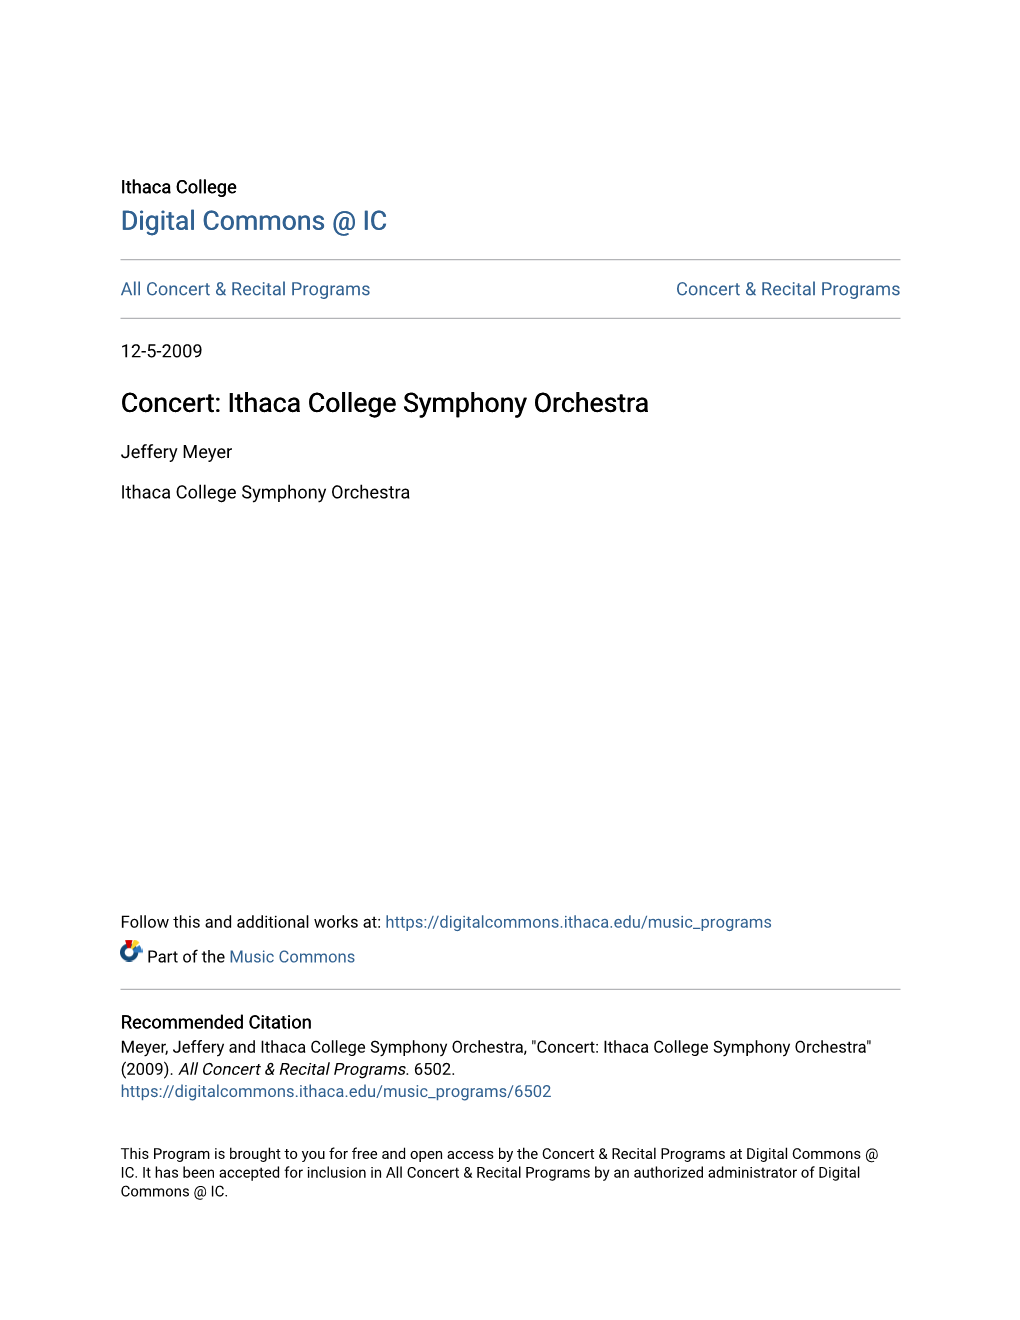 Concert: Ithaca College Symphony Orchestra